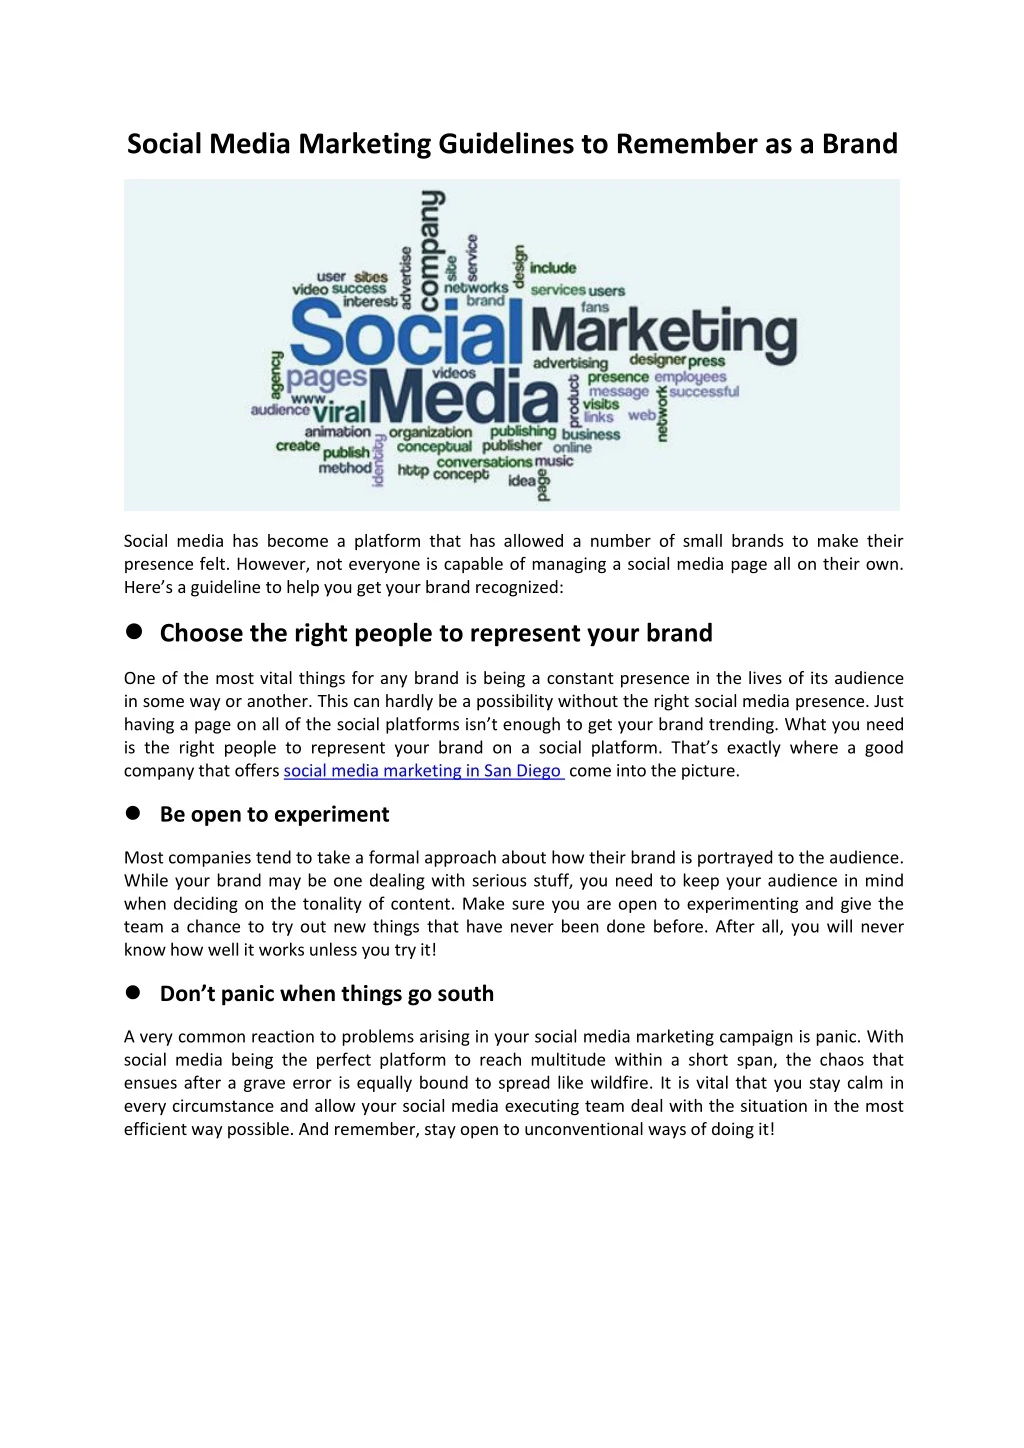 social media marketing guidelines to remember